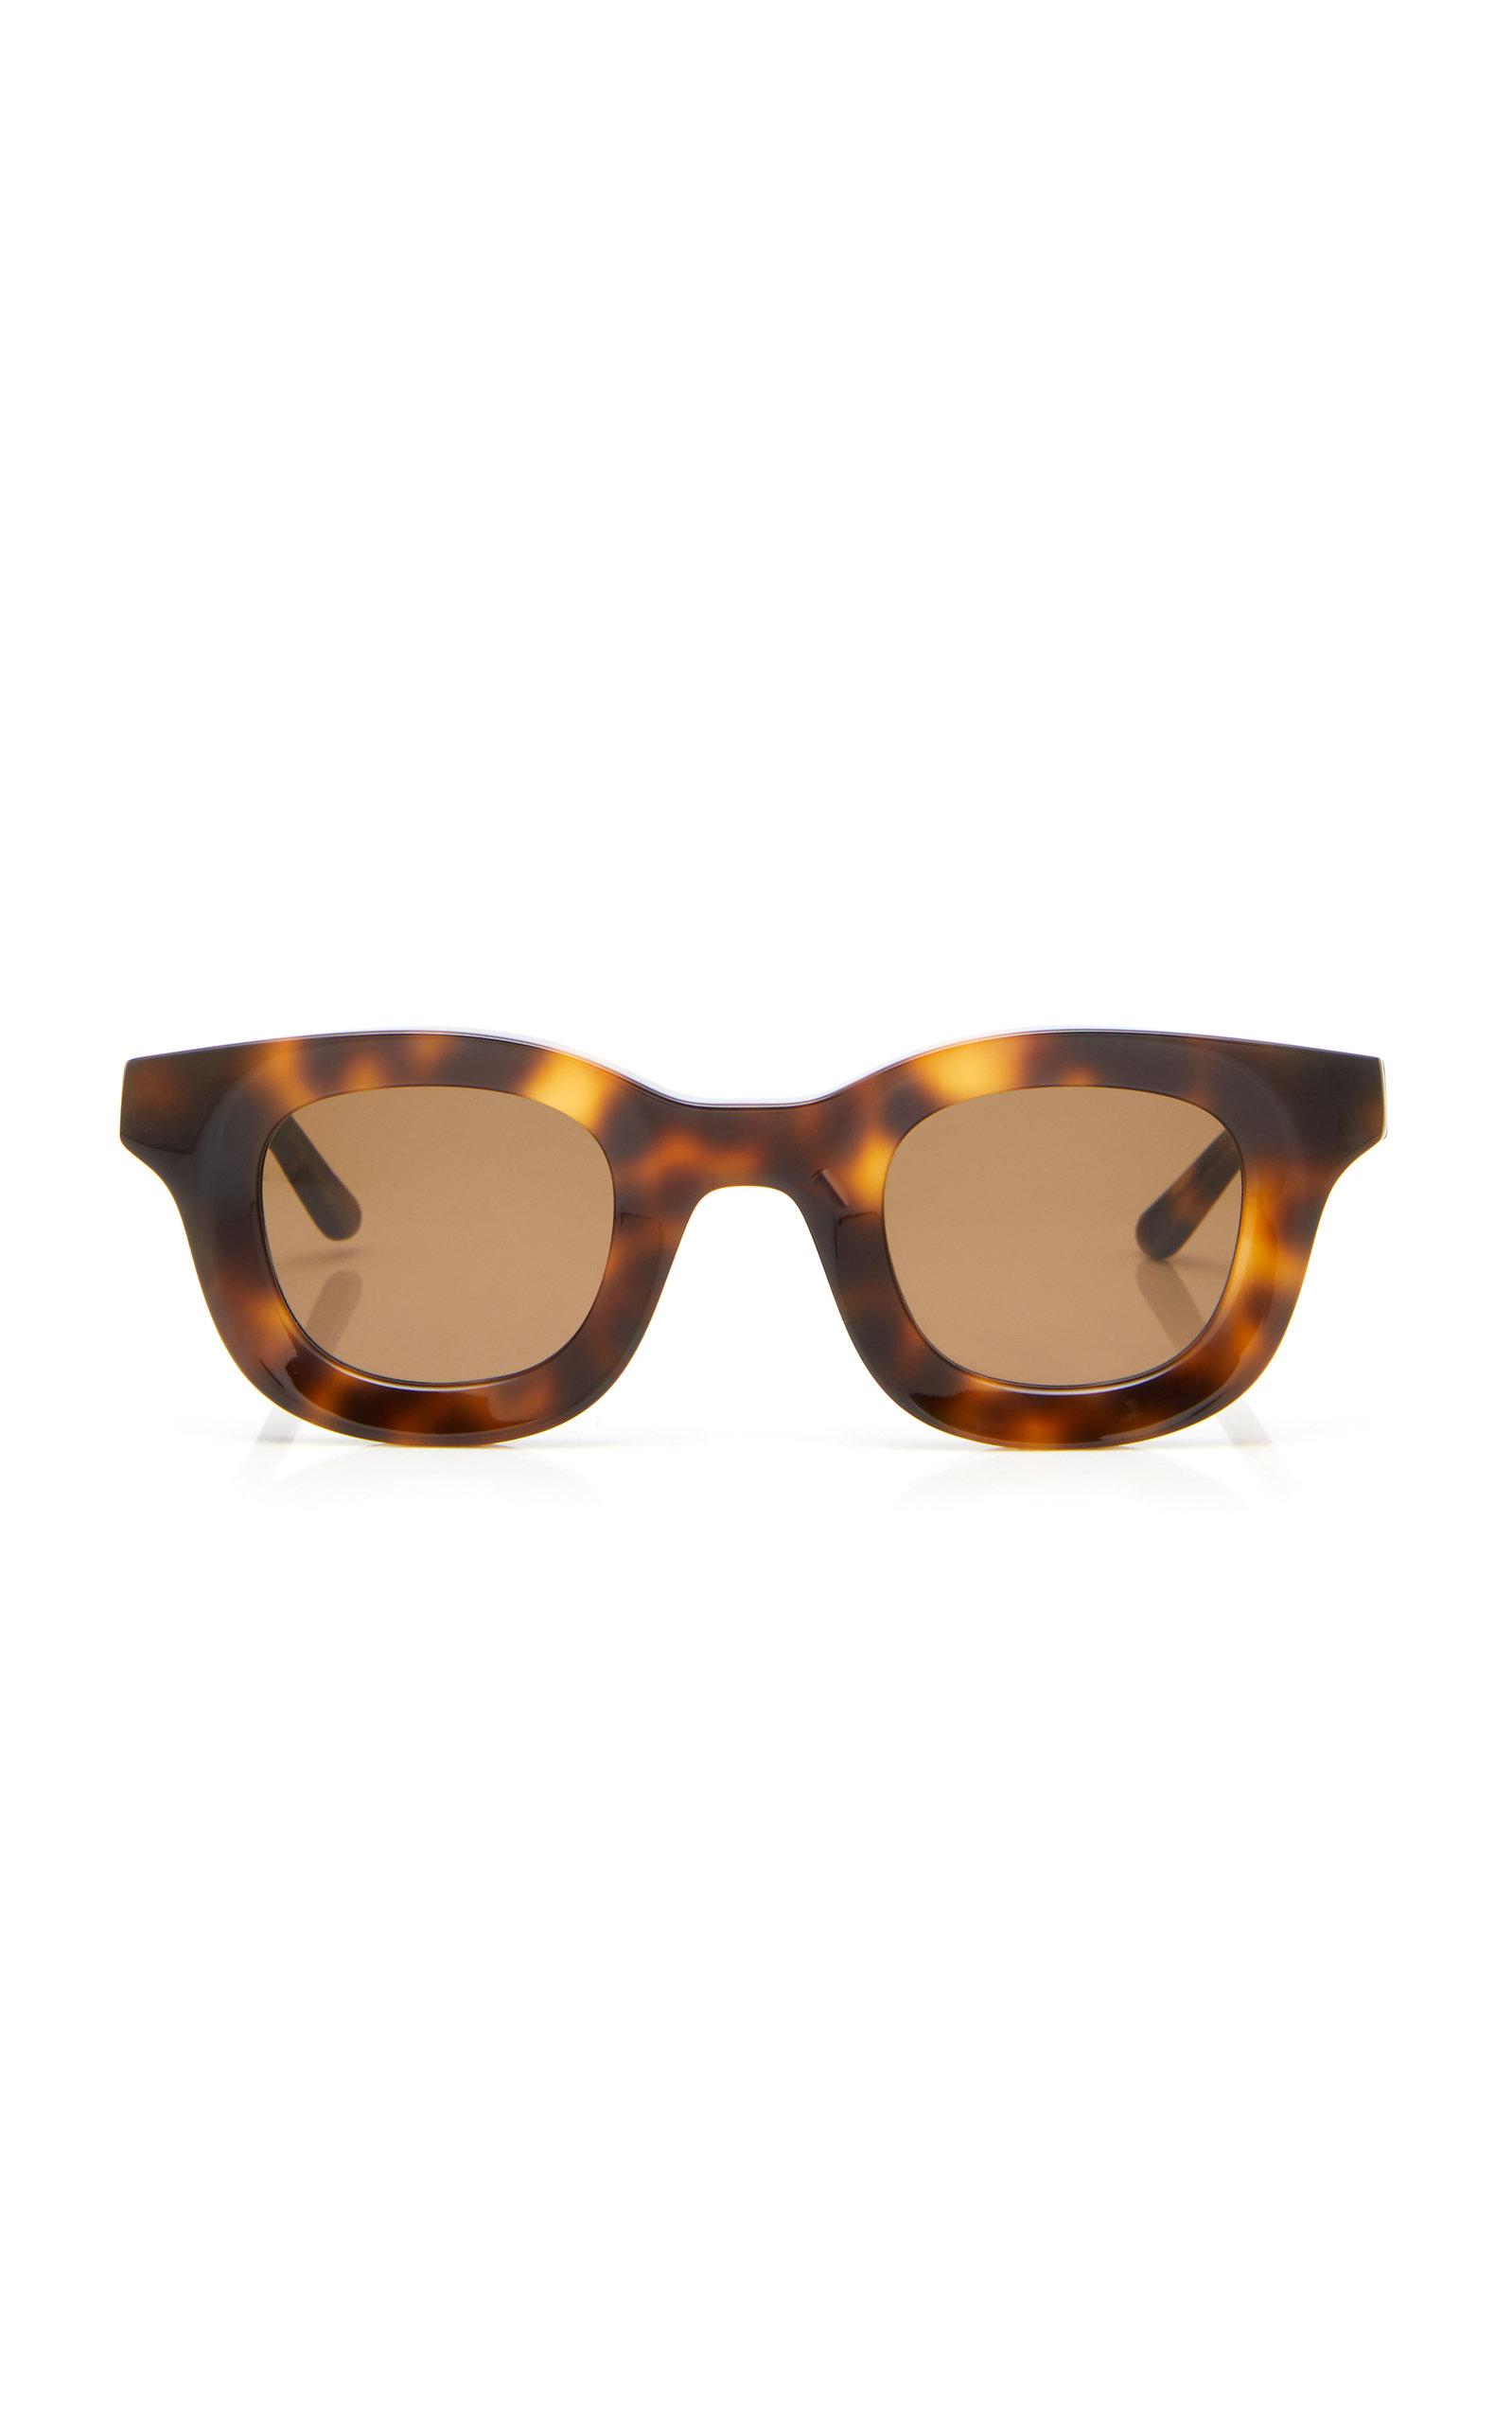 Thierry Lasry Rhude X Rhodeo Acetate Square-frame Sunglasses in Brown ...